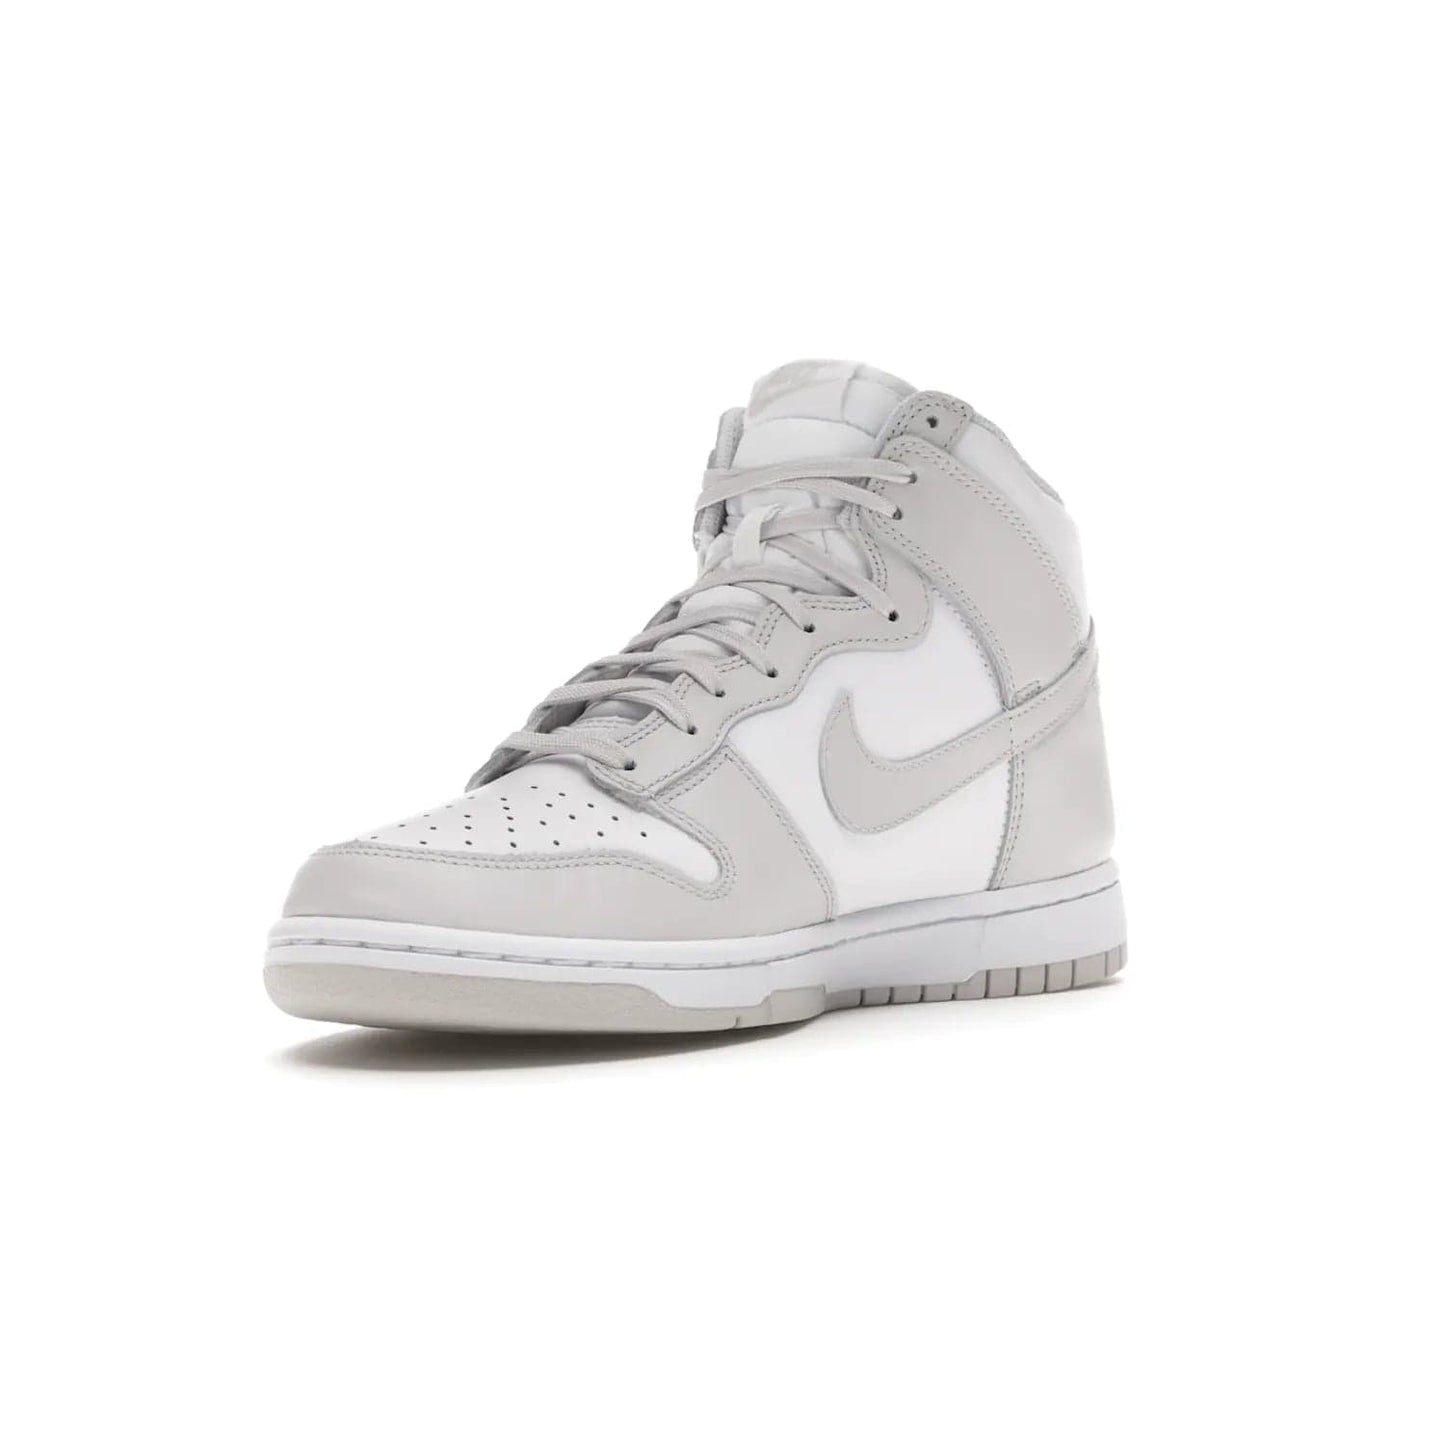 Nike Dunk High Retro White Vast Grey (2021) - Image 14 - Only at www.BallersClubKickz.com - Nike Dunk High Retro White Vast Grey 2021: classic '80s basketball sneaker with a crisp white base, grey overlays, midsole tooling and outsole. Dropped Feb. 2021.